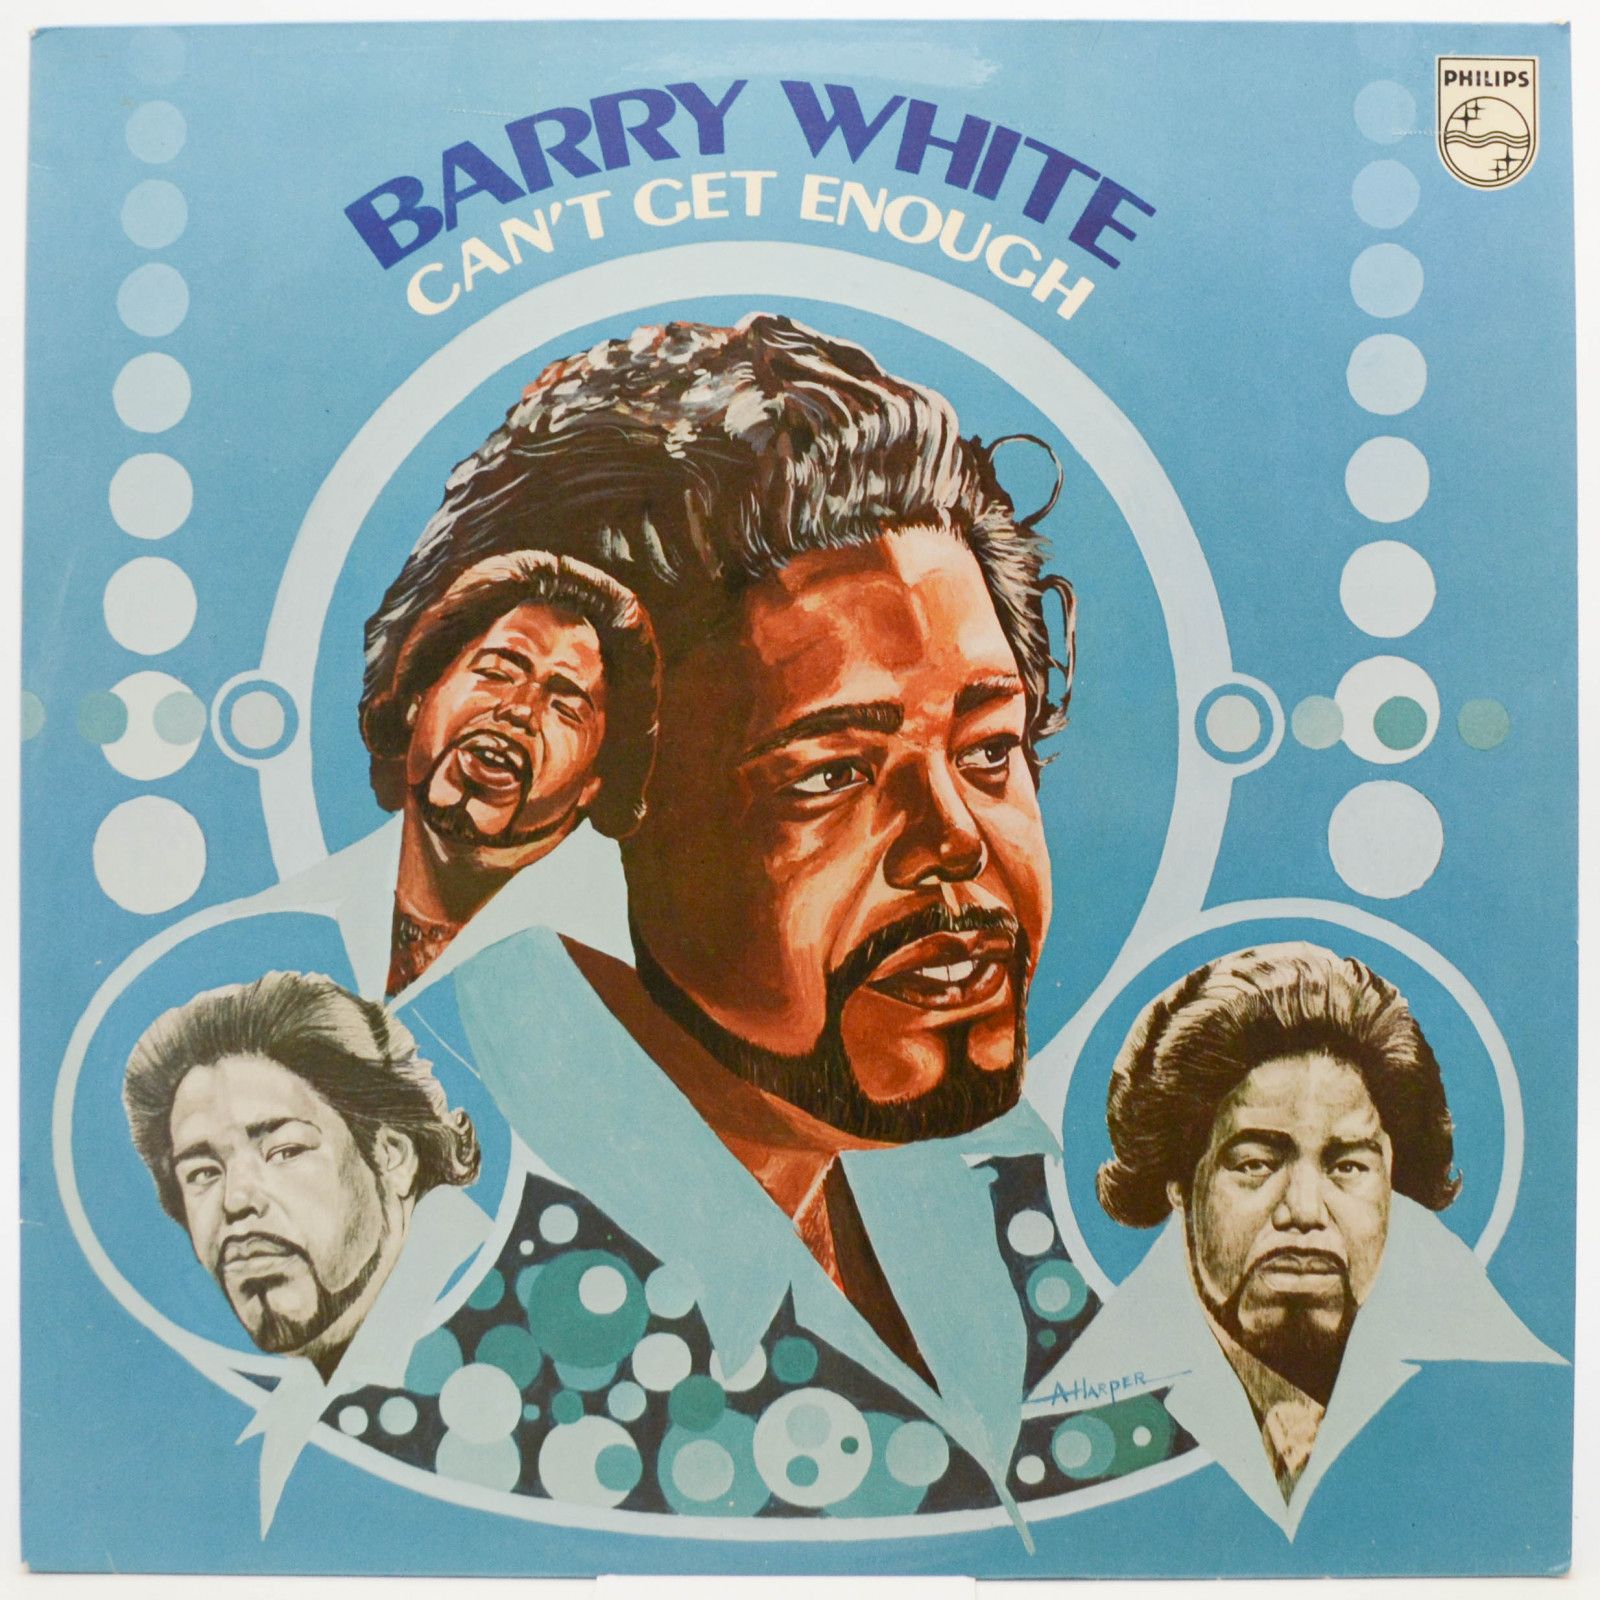 Barry White — Can't Get Enough, 1974